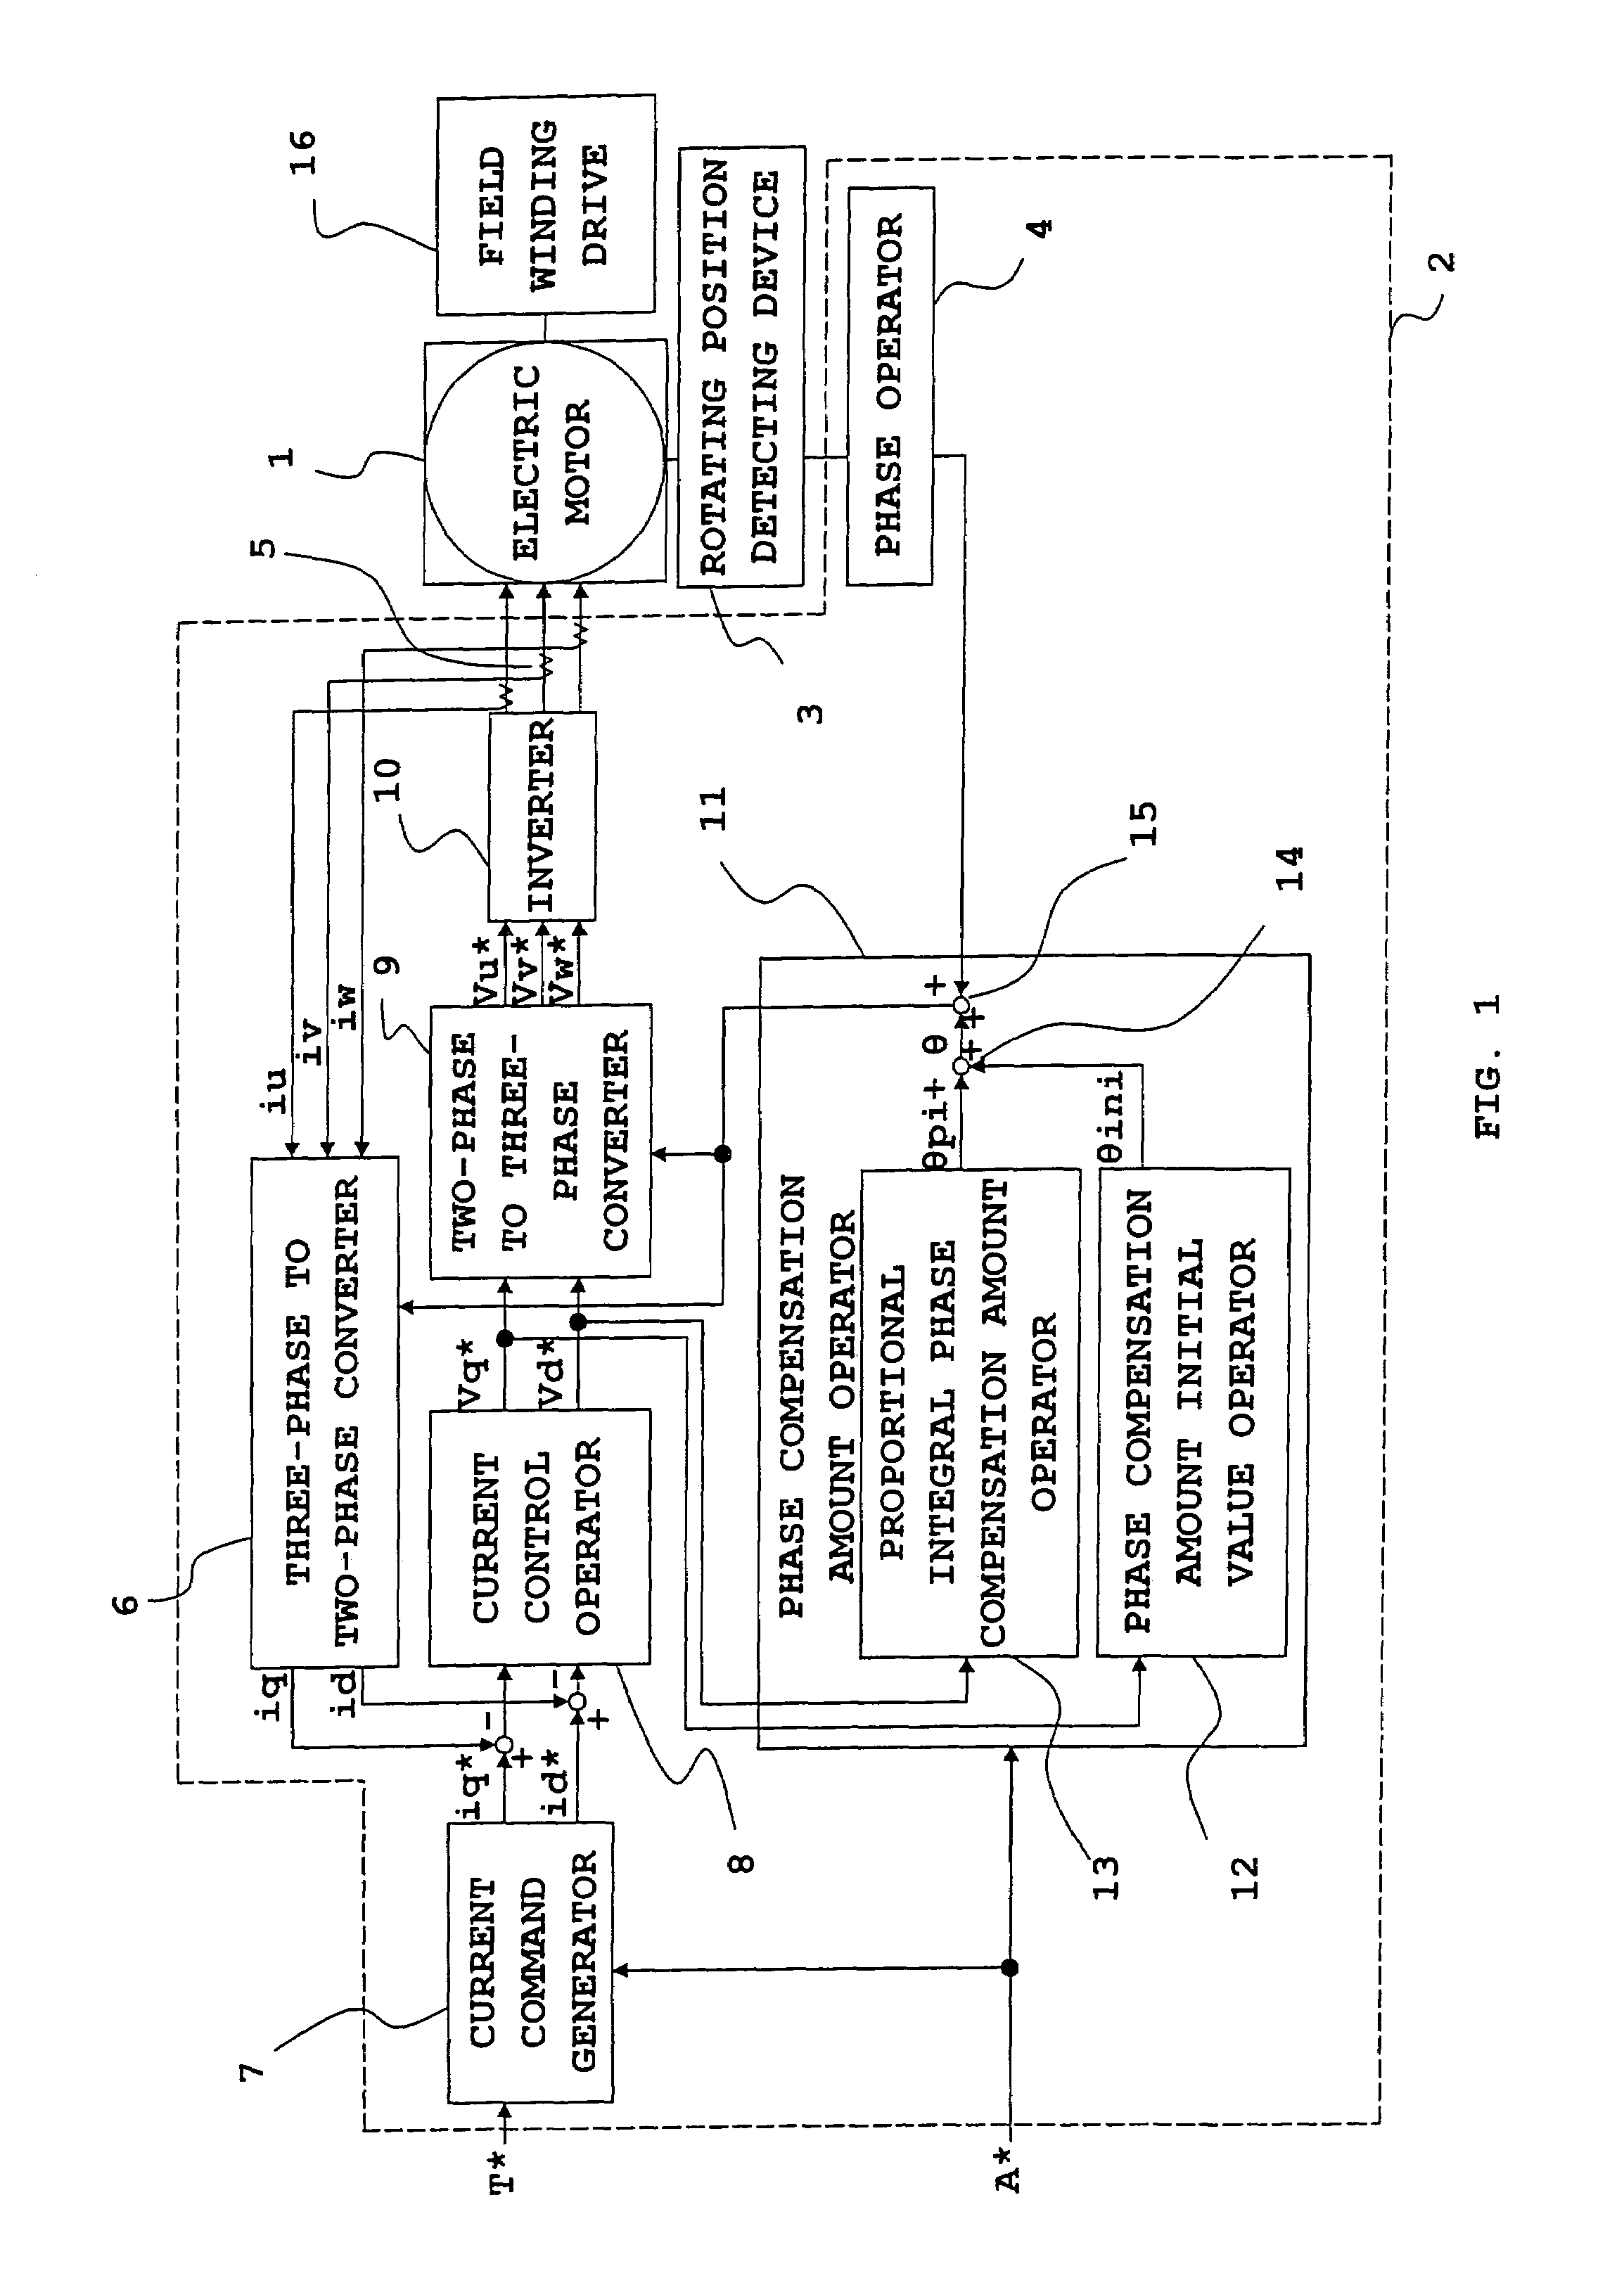 Origin offset calculation method of rotational position detecting device of electric motor and motor control device using the calculation method